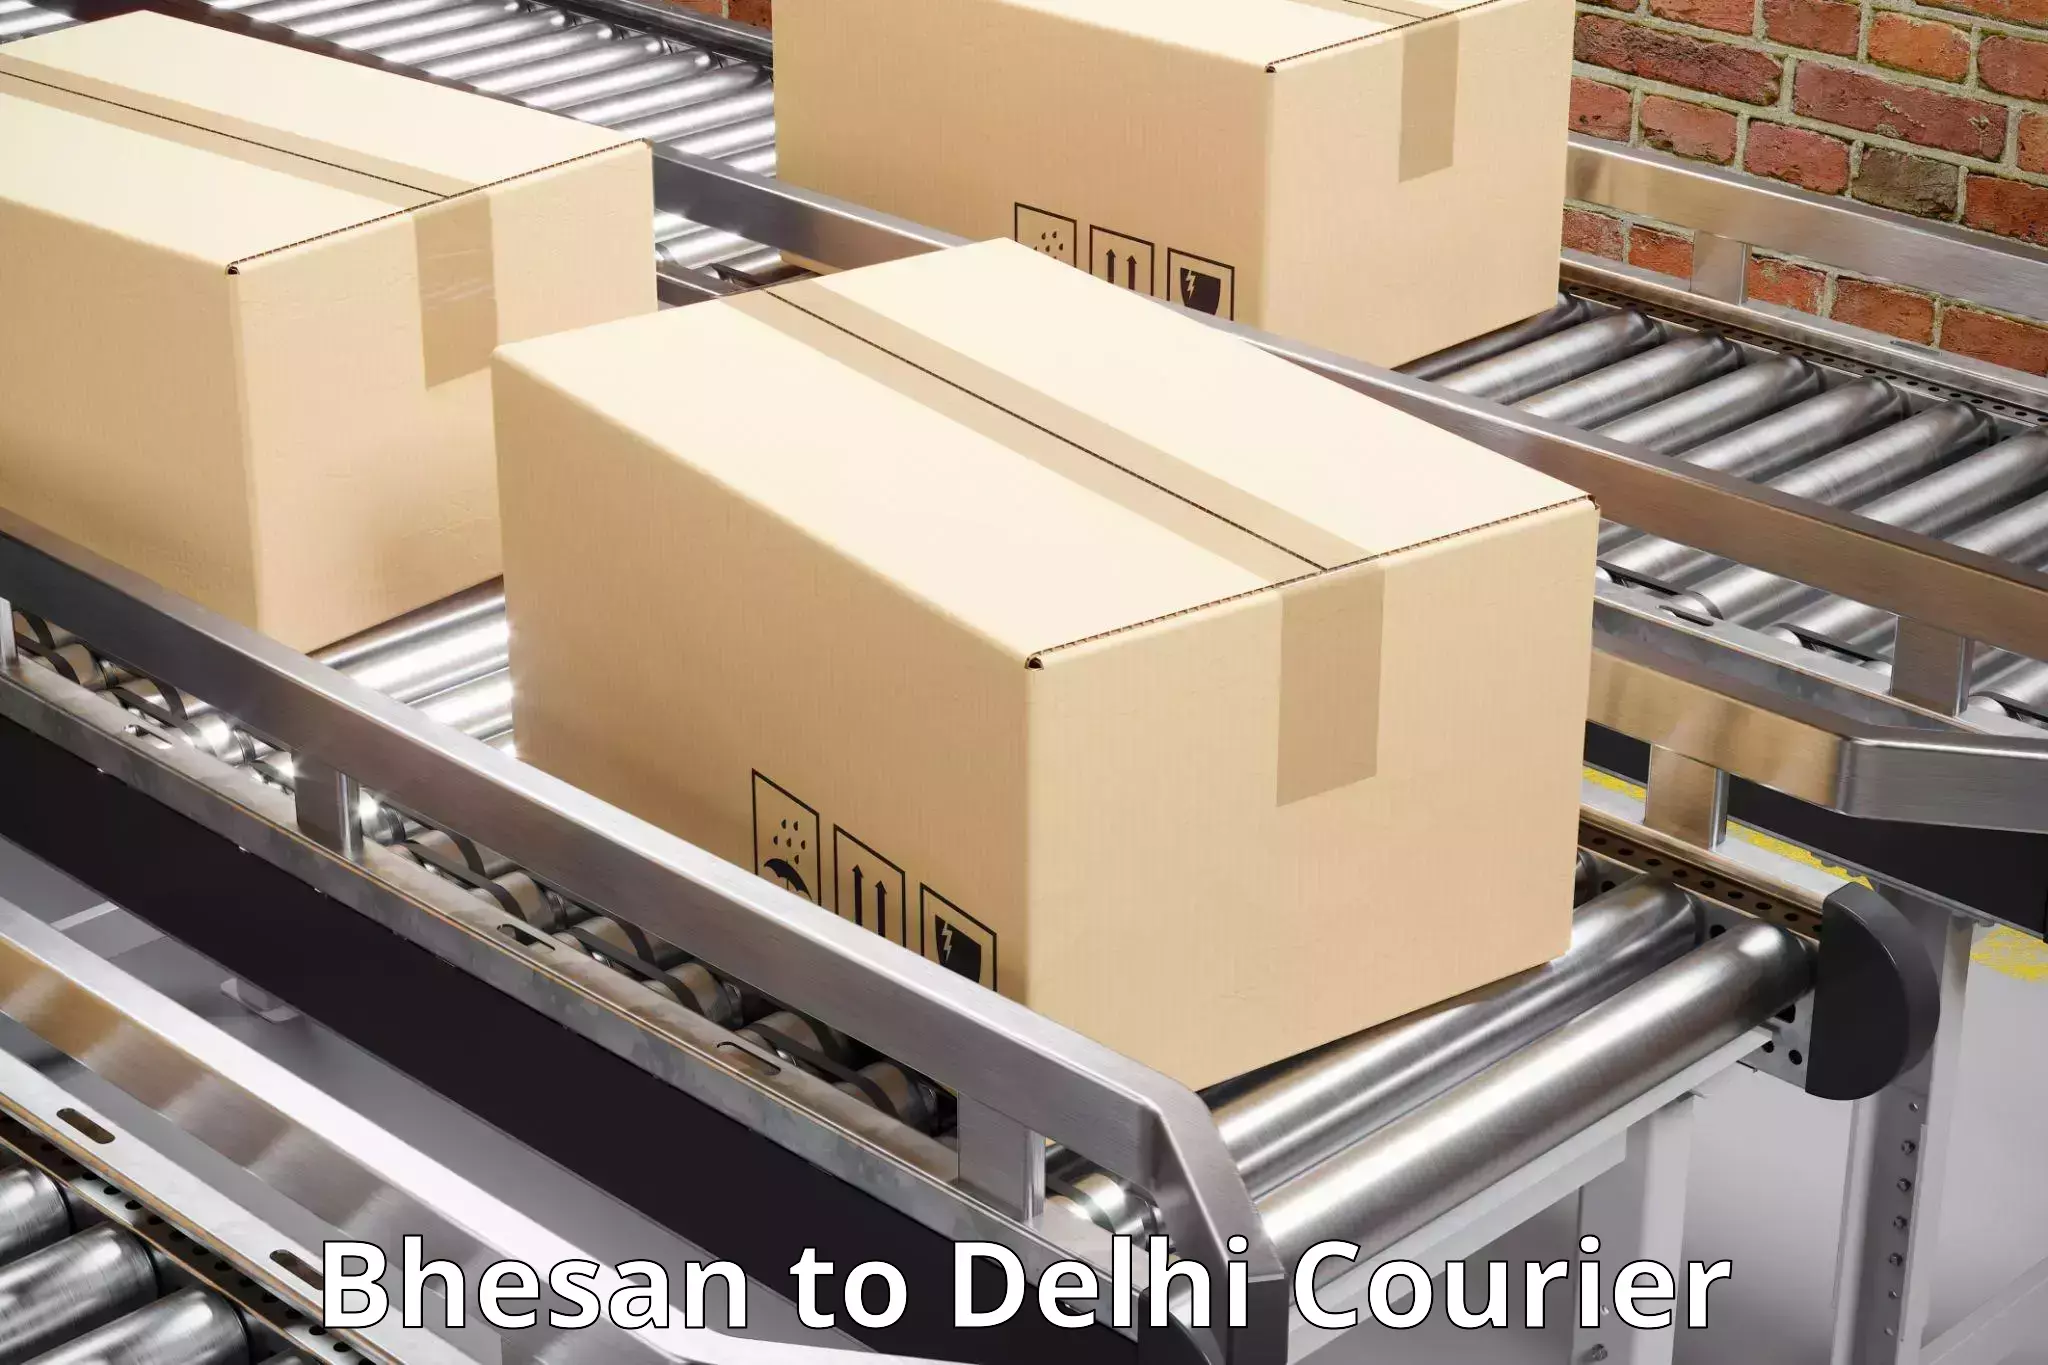 Flexible delivery schedules Bhesan to University of Delhi